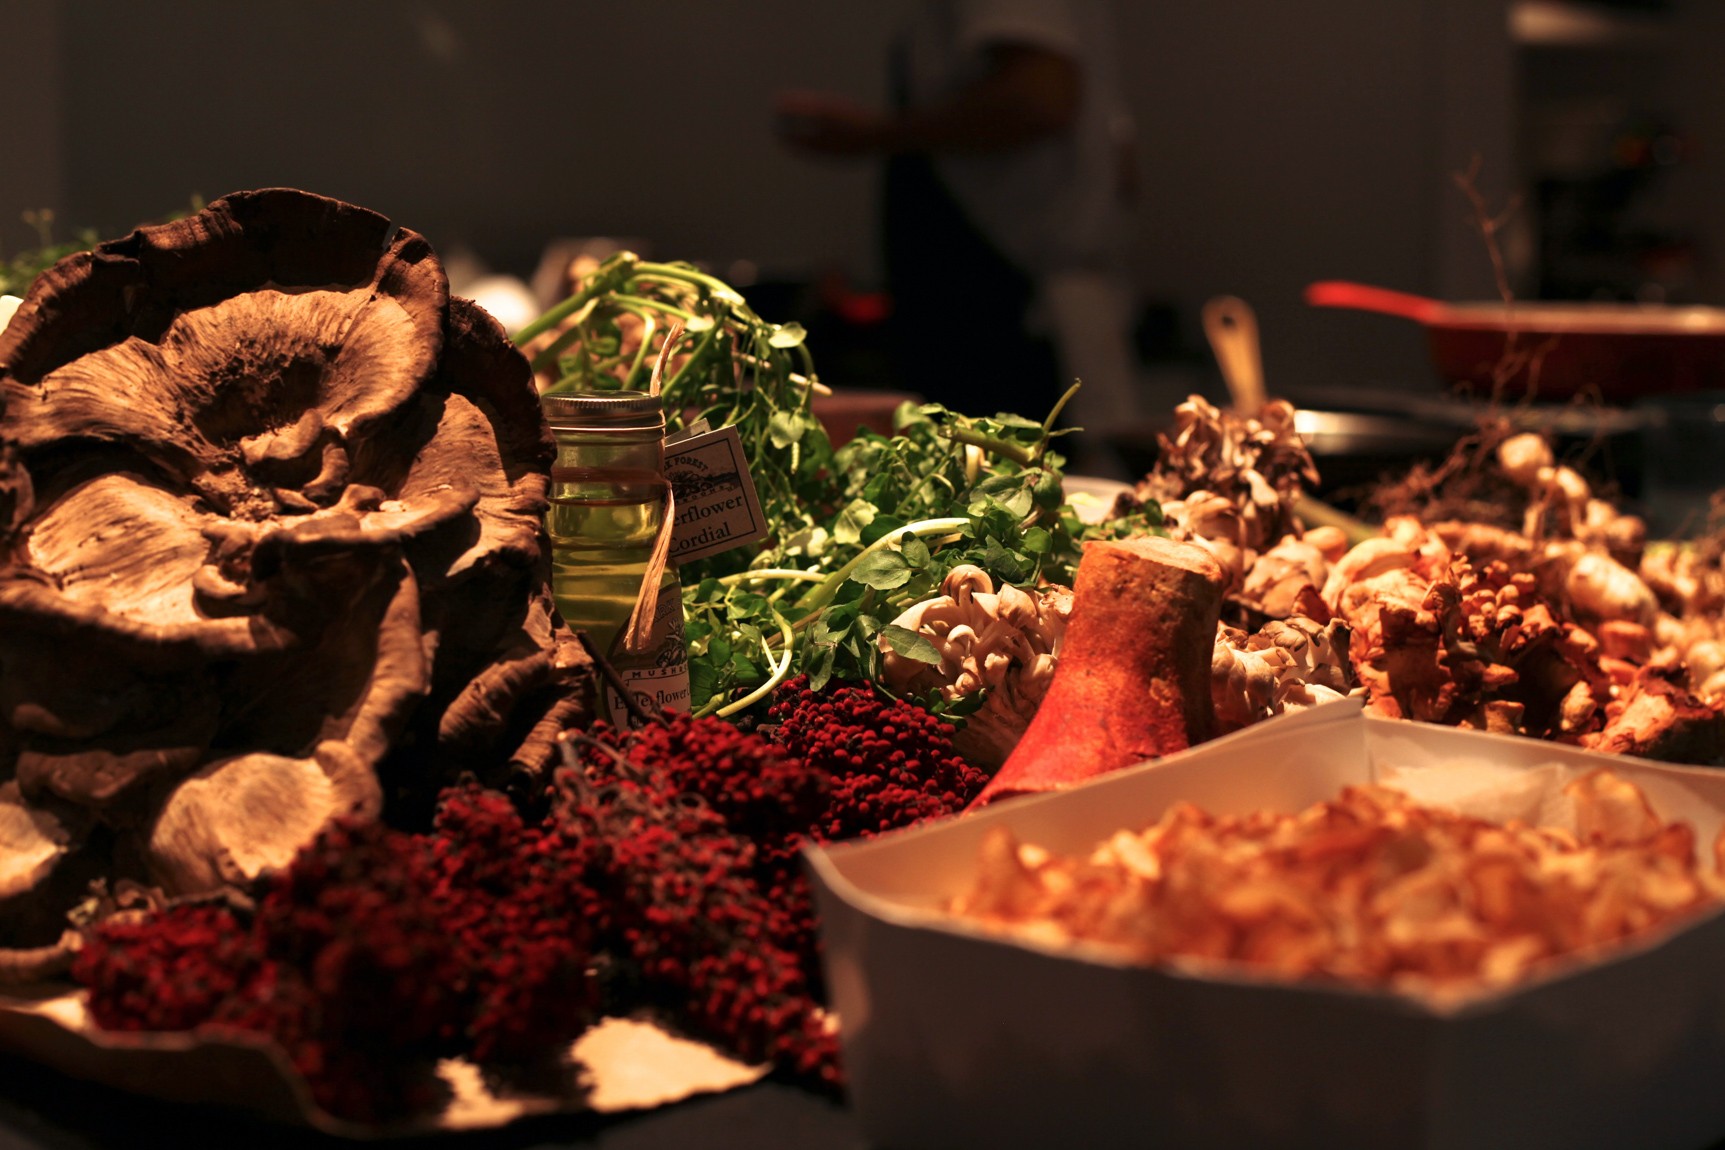 A closeup of the food station with mushrooms and herbs.